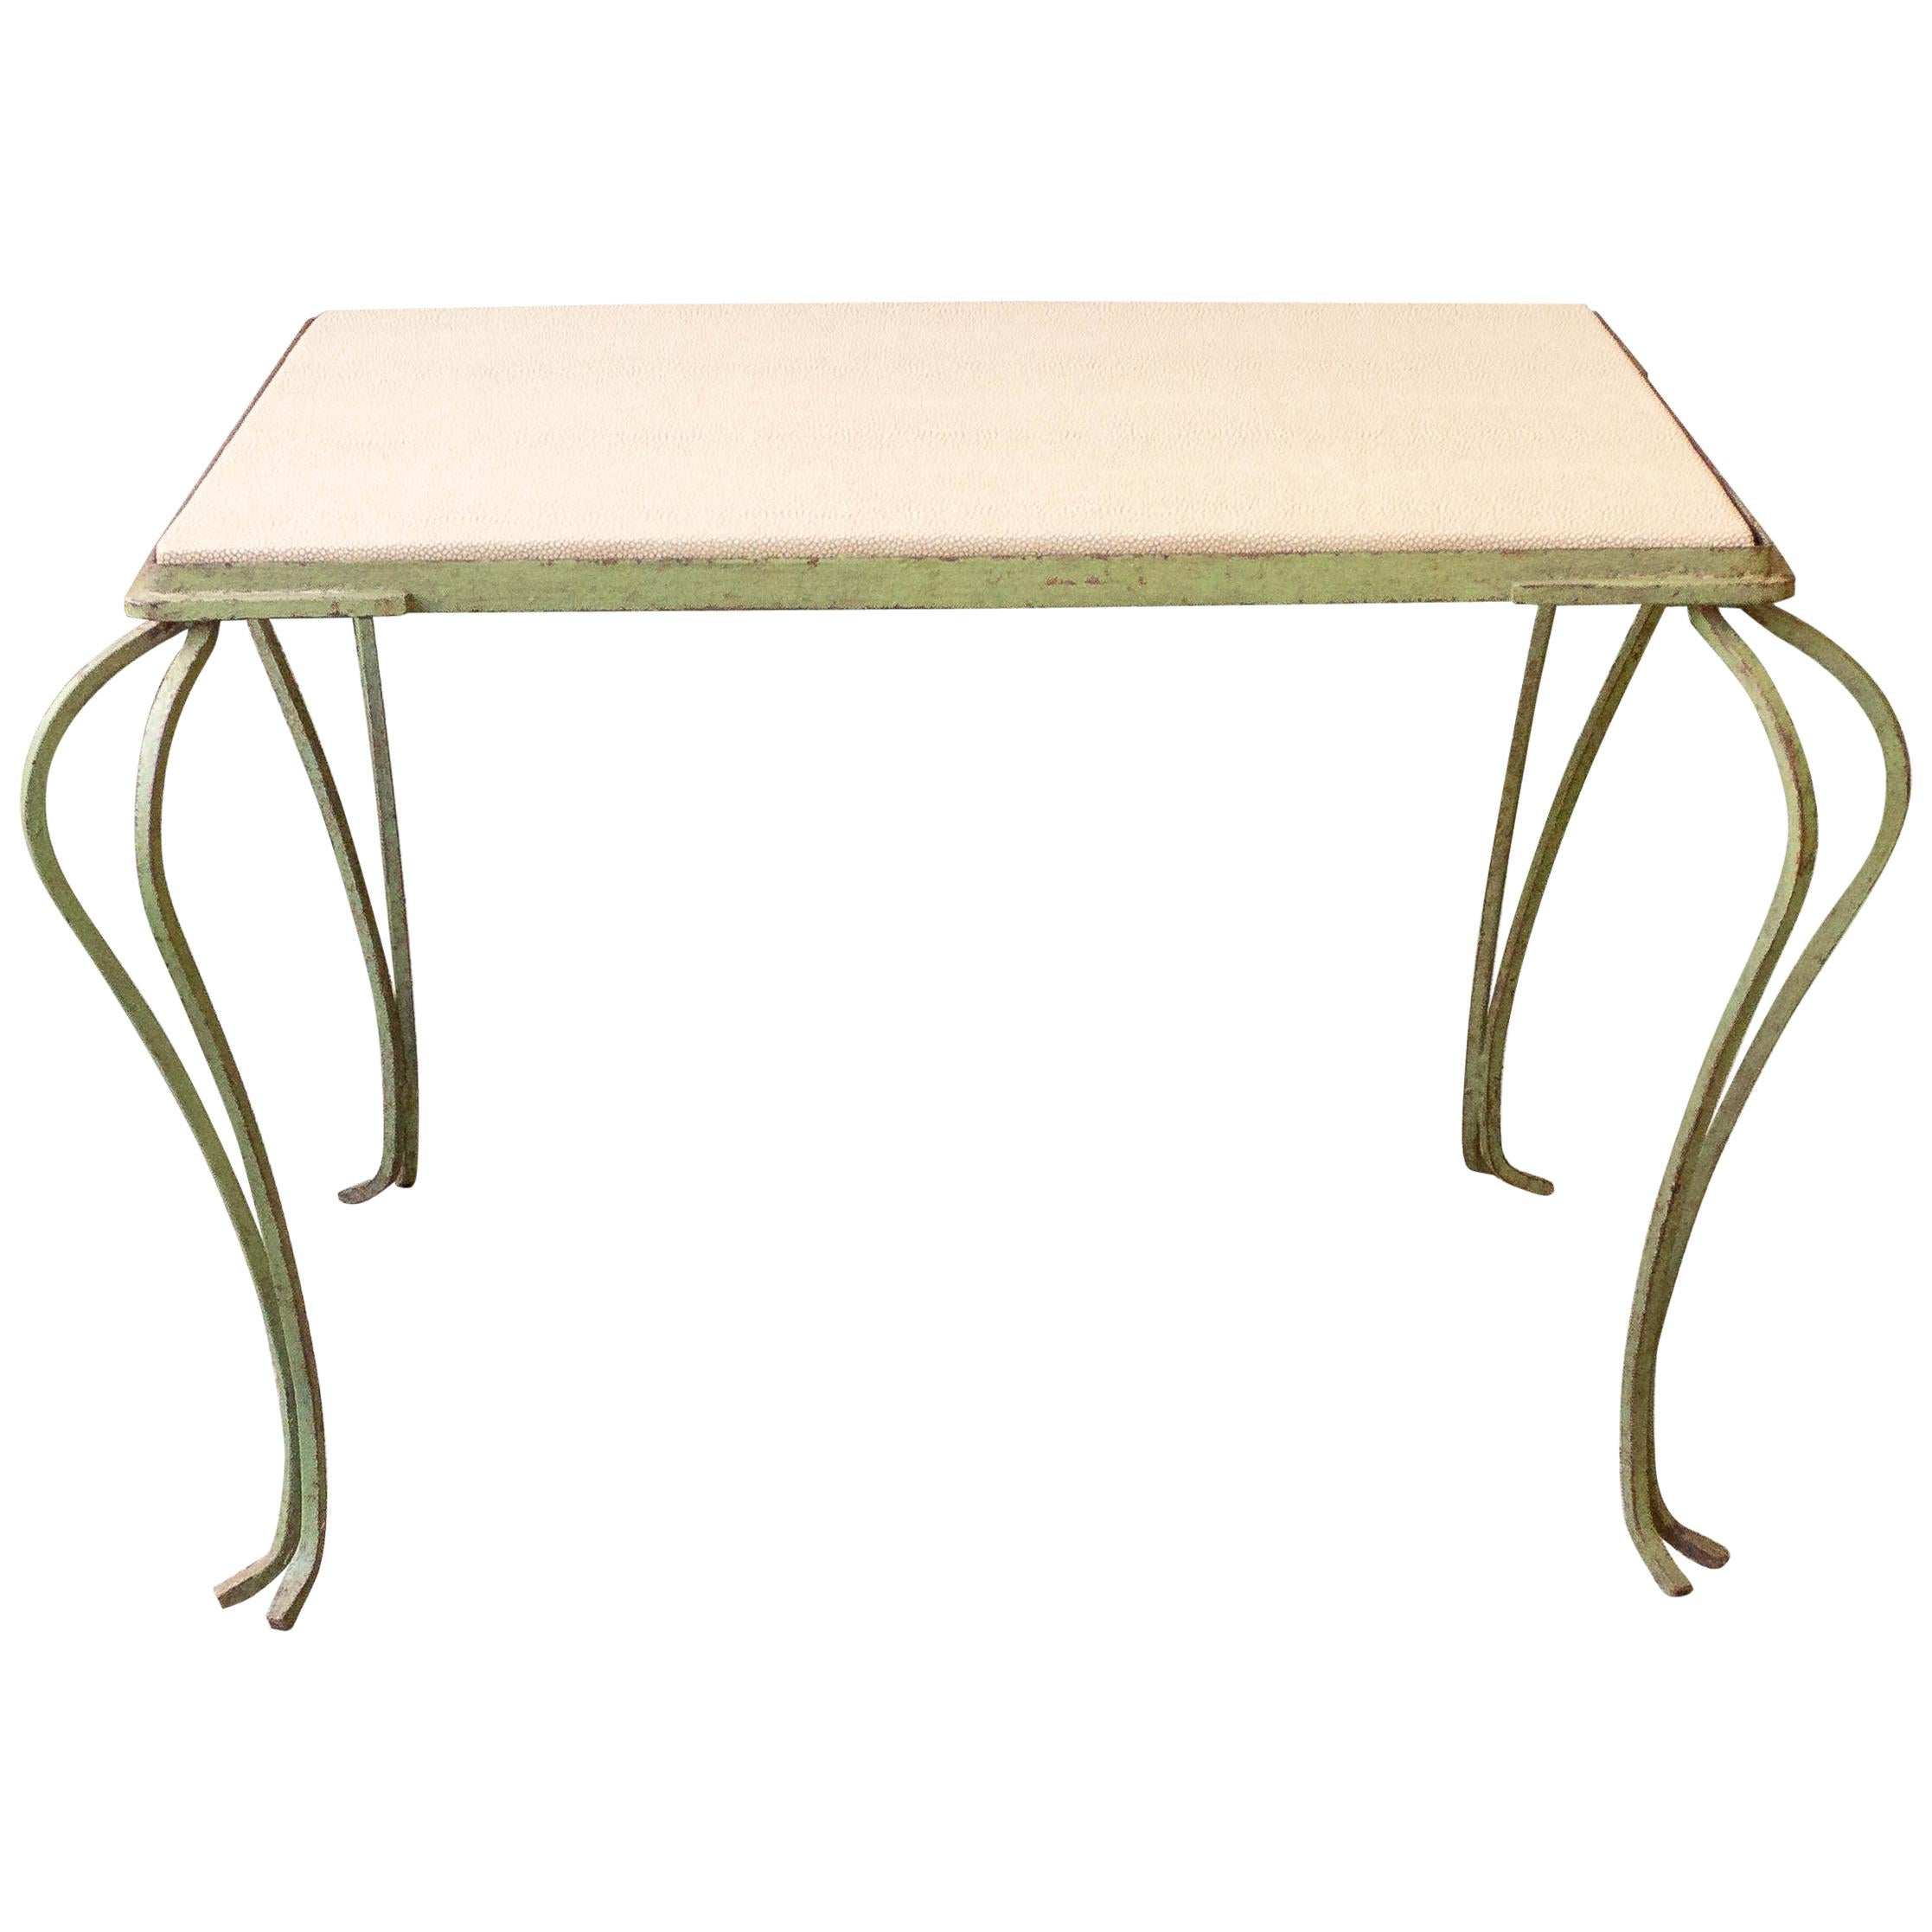 Green Painted Coffee Table with Faux Shagreen Top